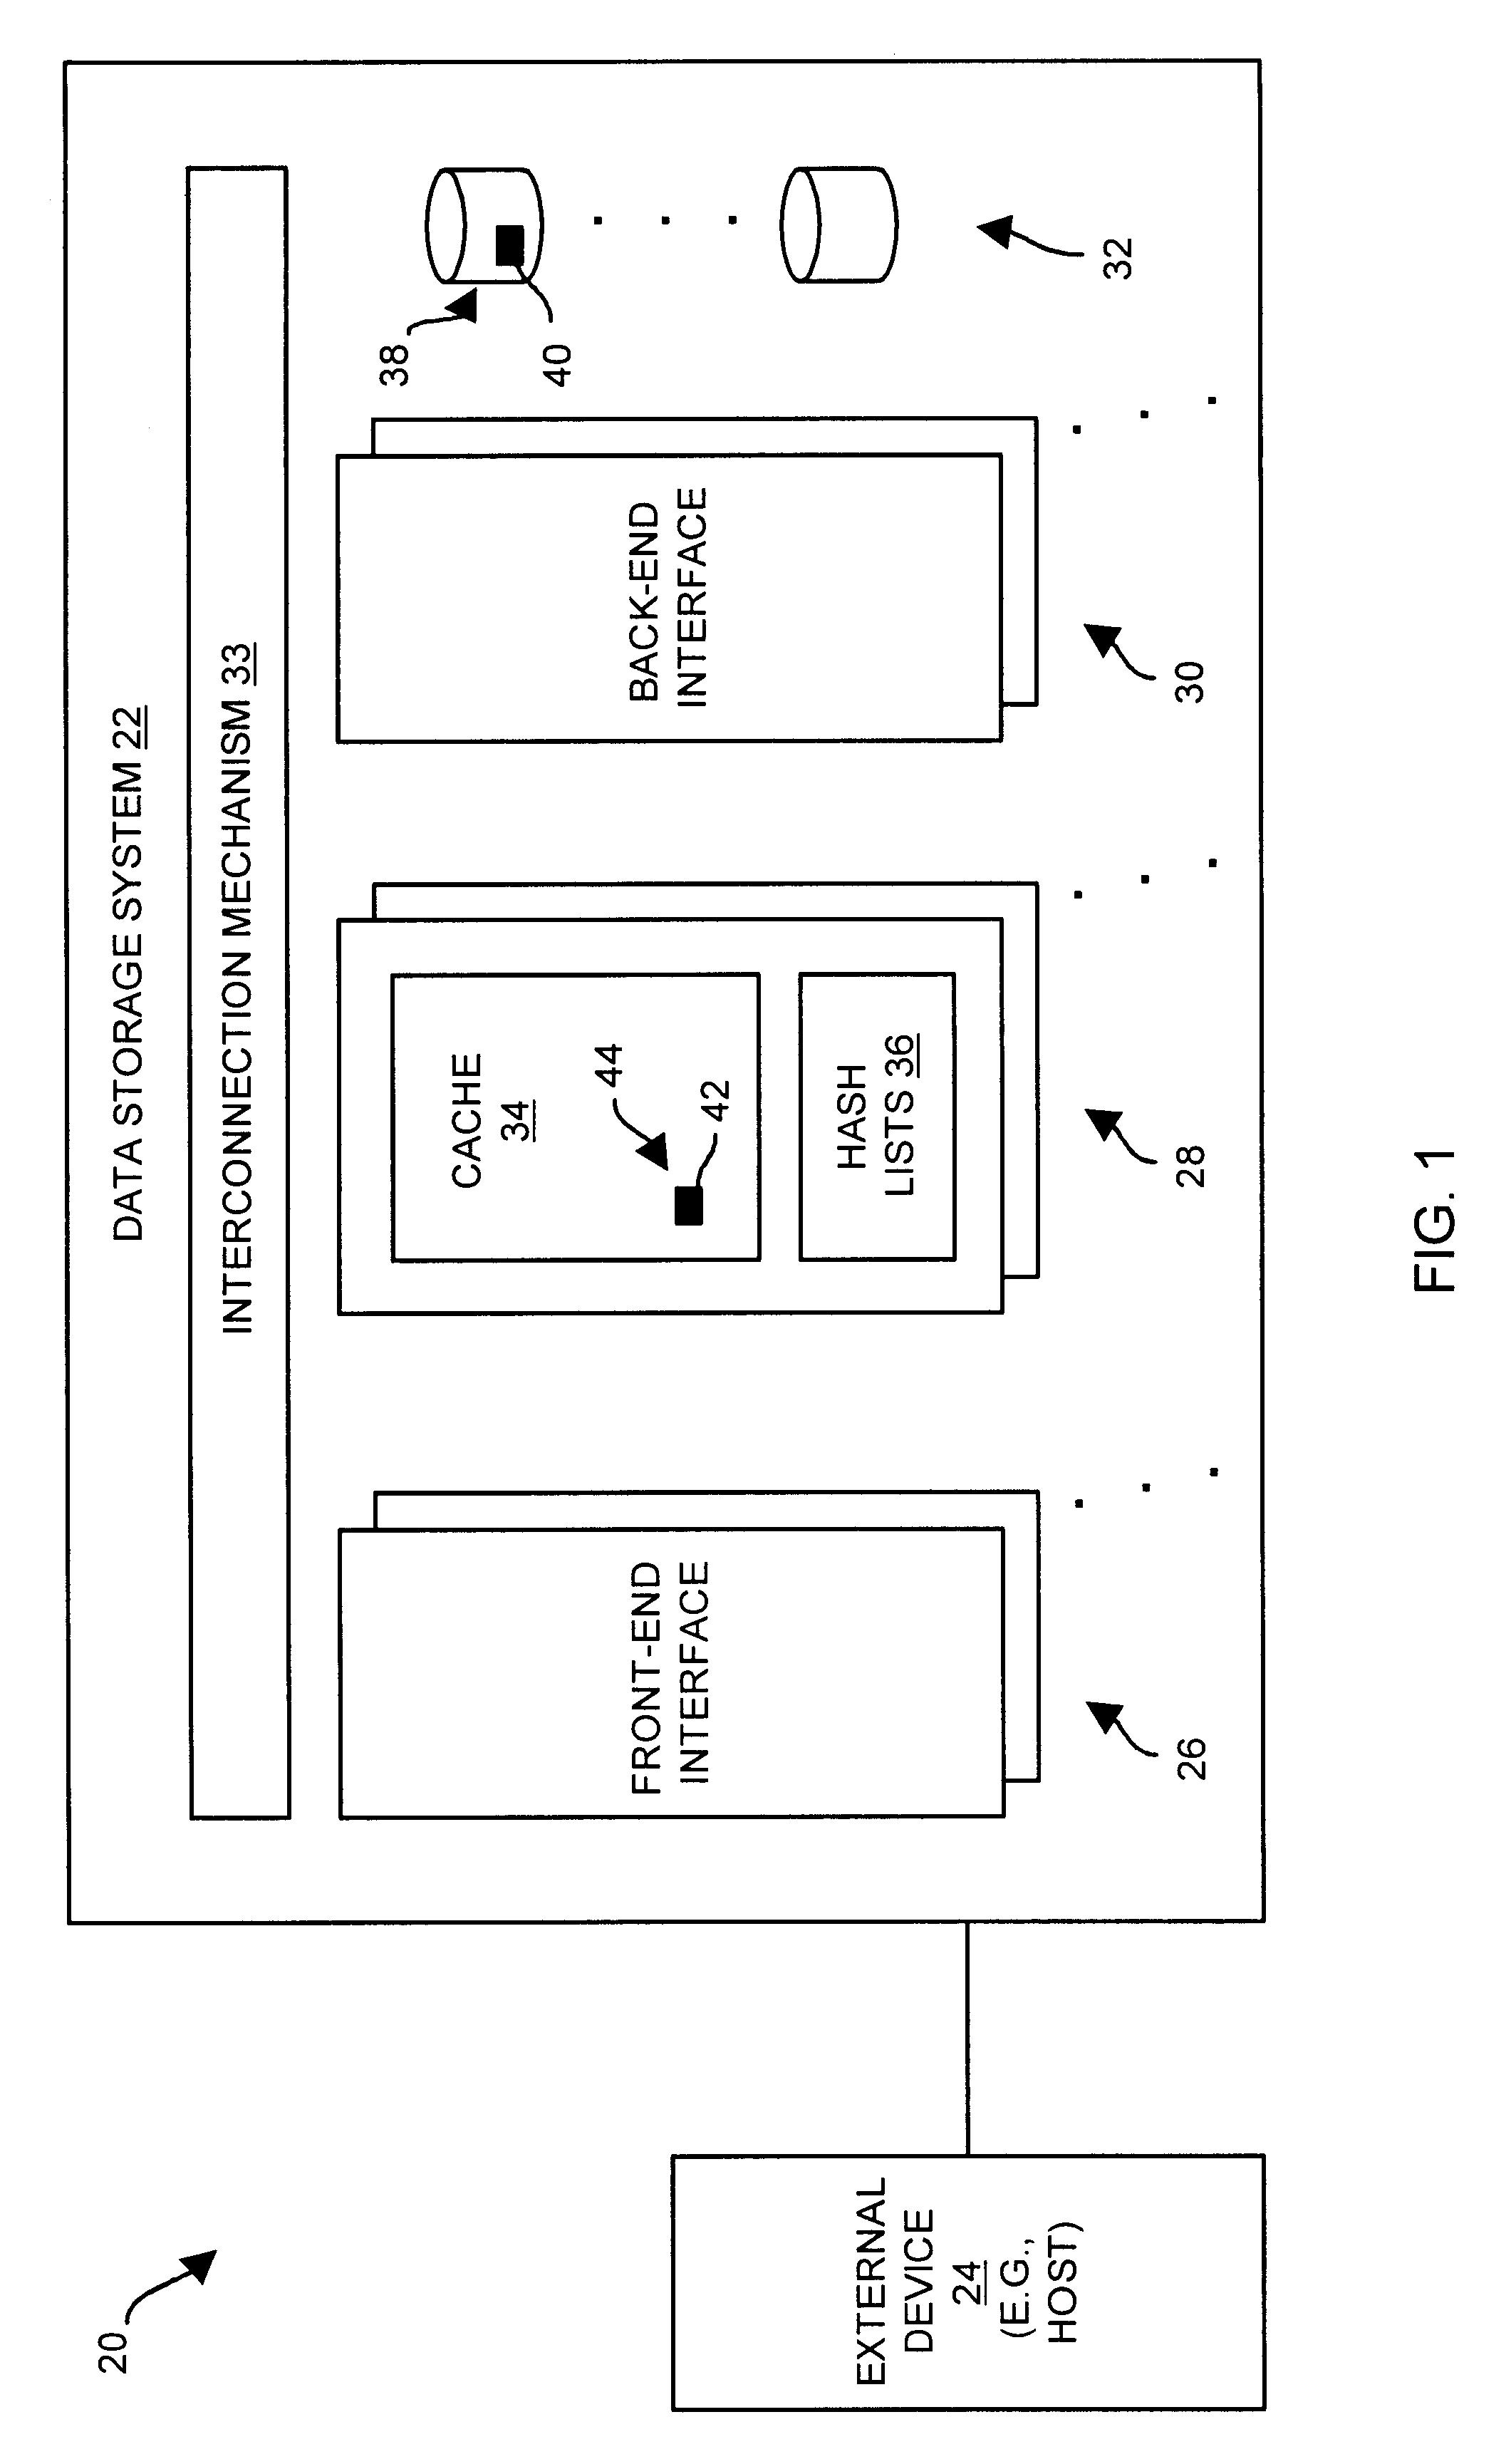 Methods and apparatus for accessing data elements using improved hashing techniques